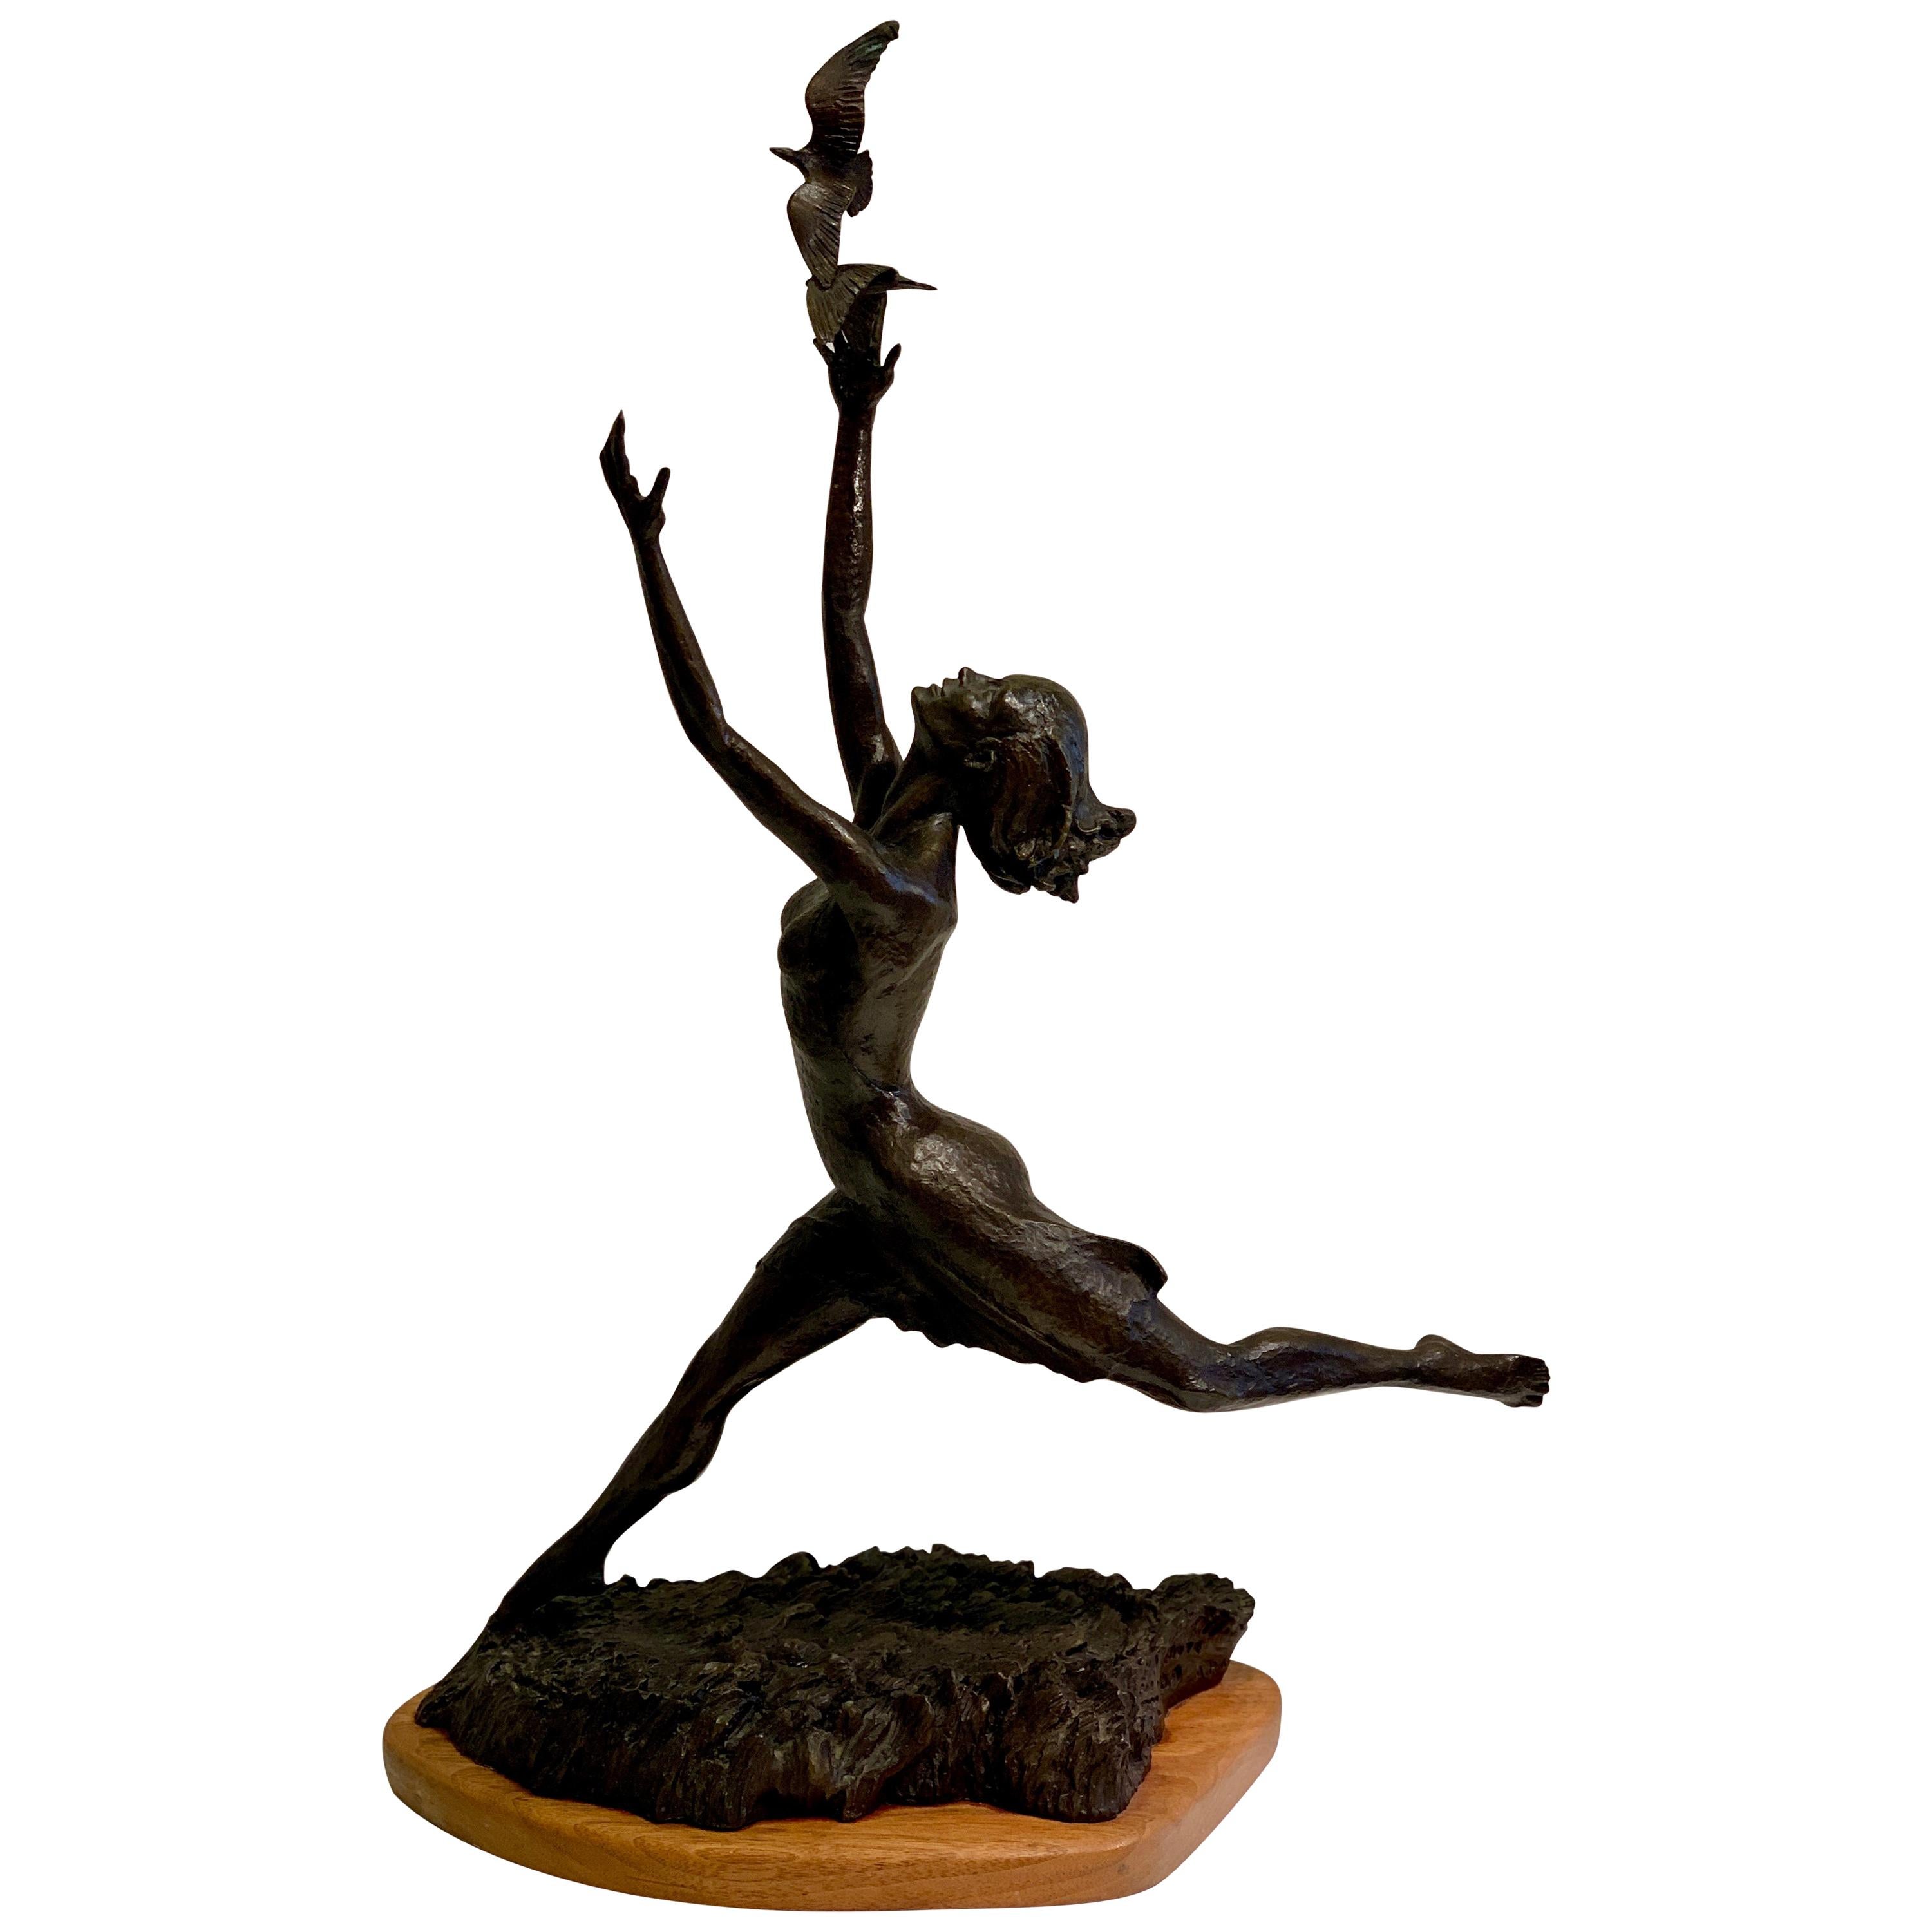 Art Deco Style Bronze Sculpture of a Woman Reaching for Seagulls by M. Young